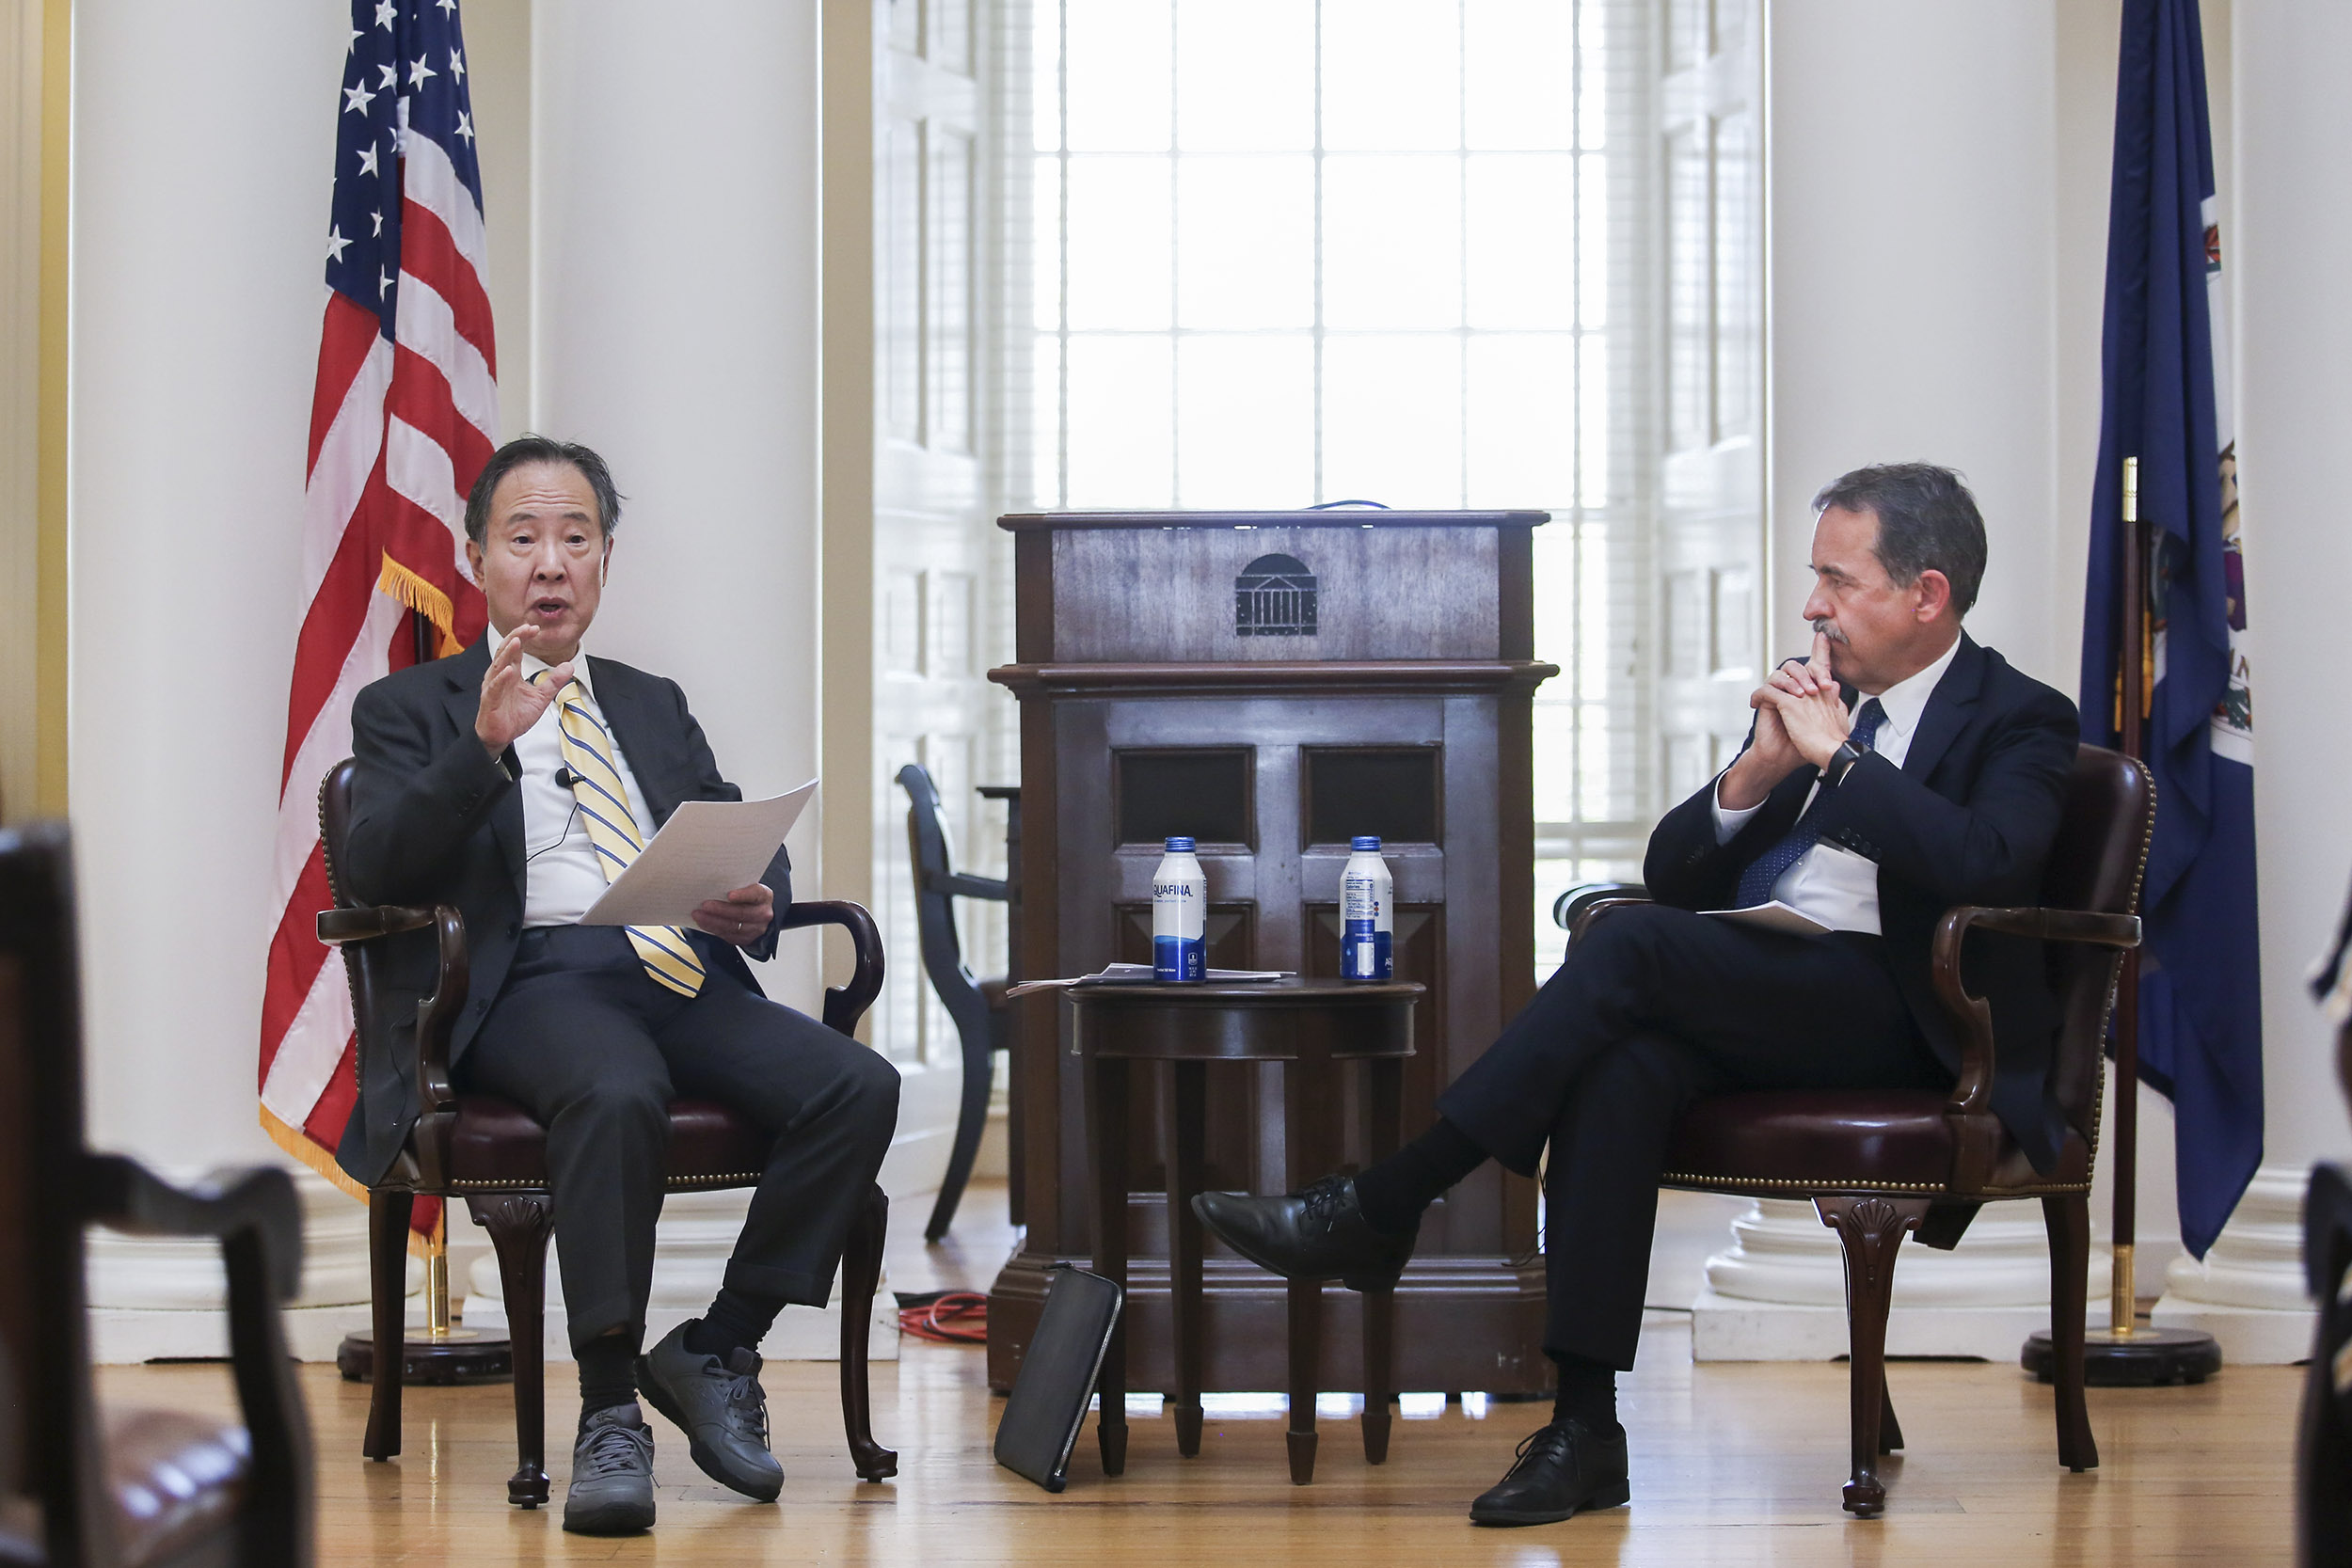 Koji Tomita, left, and Steve Mull, right, sit in two brown chairs while Mull looks at  Tomita speaking to a crowd